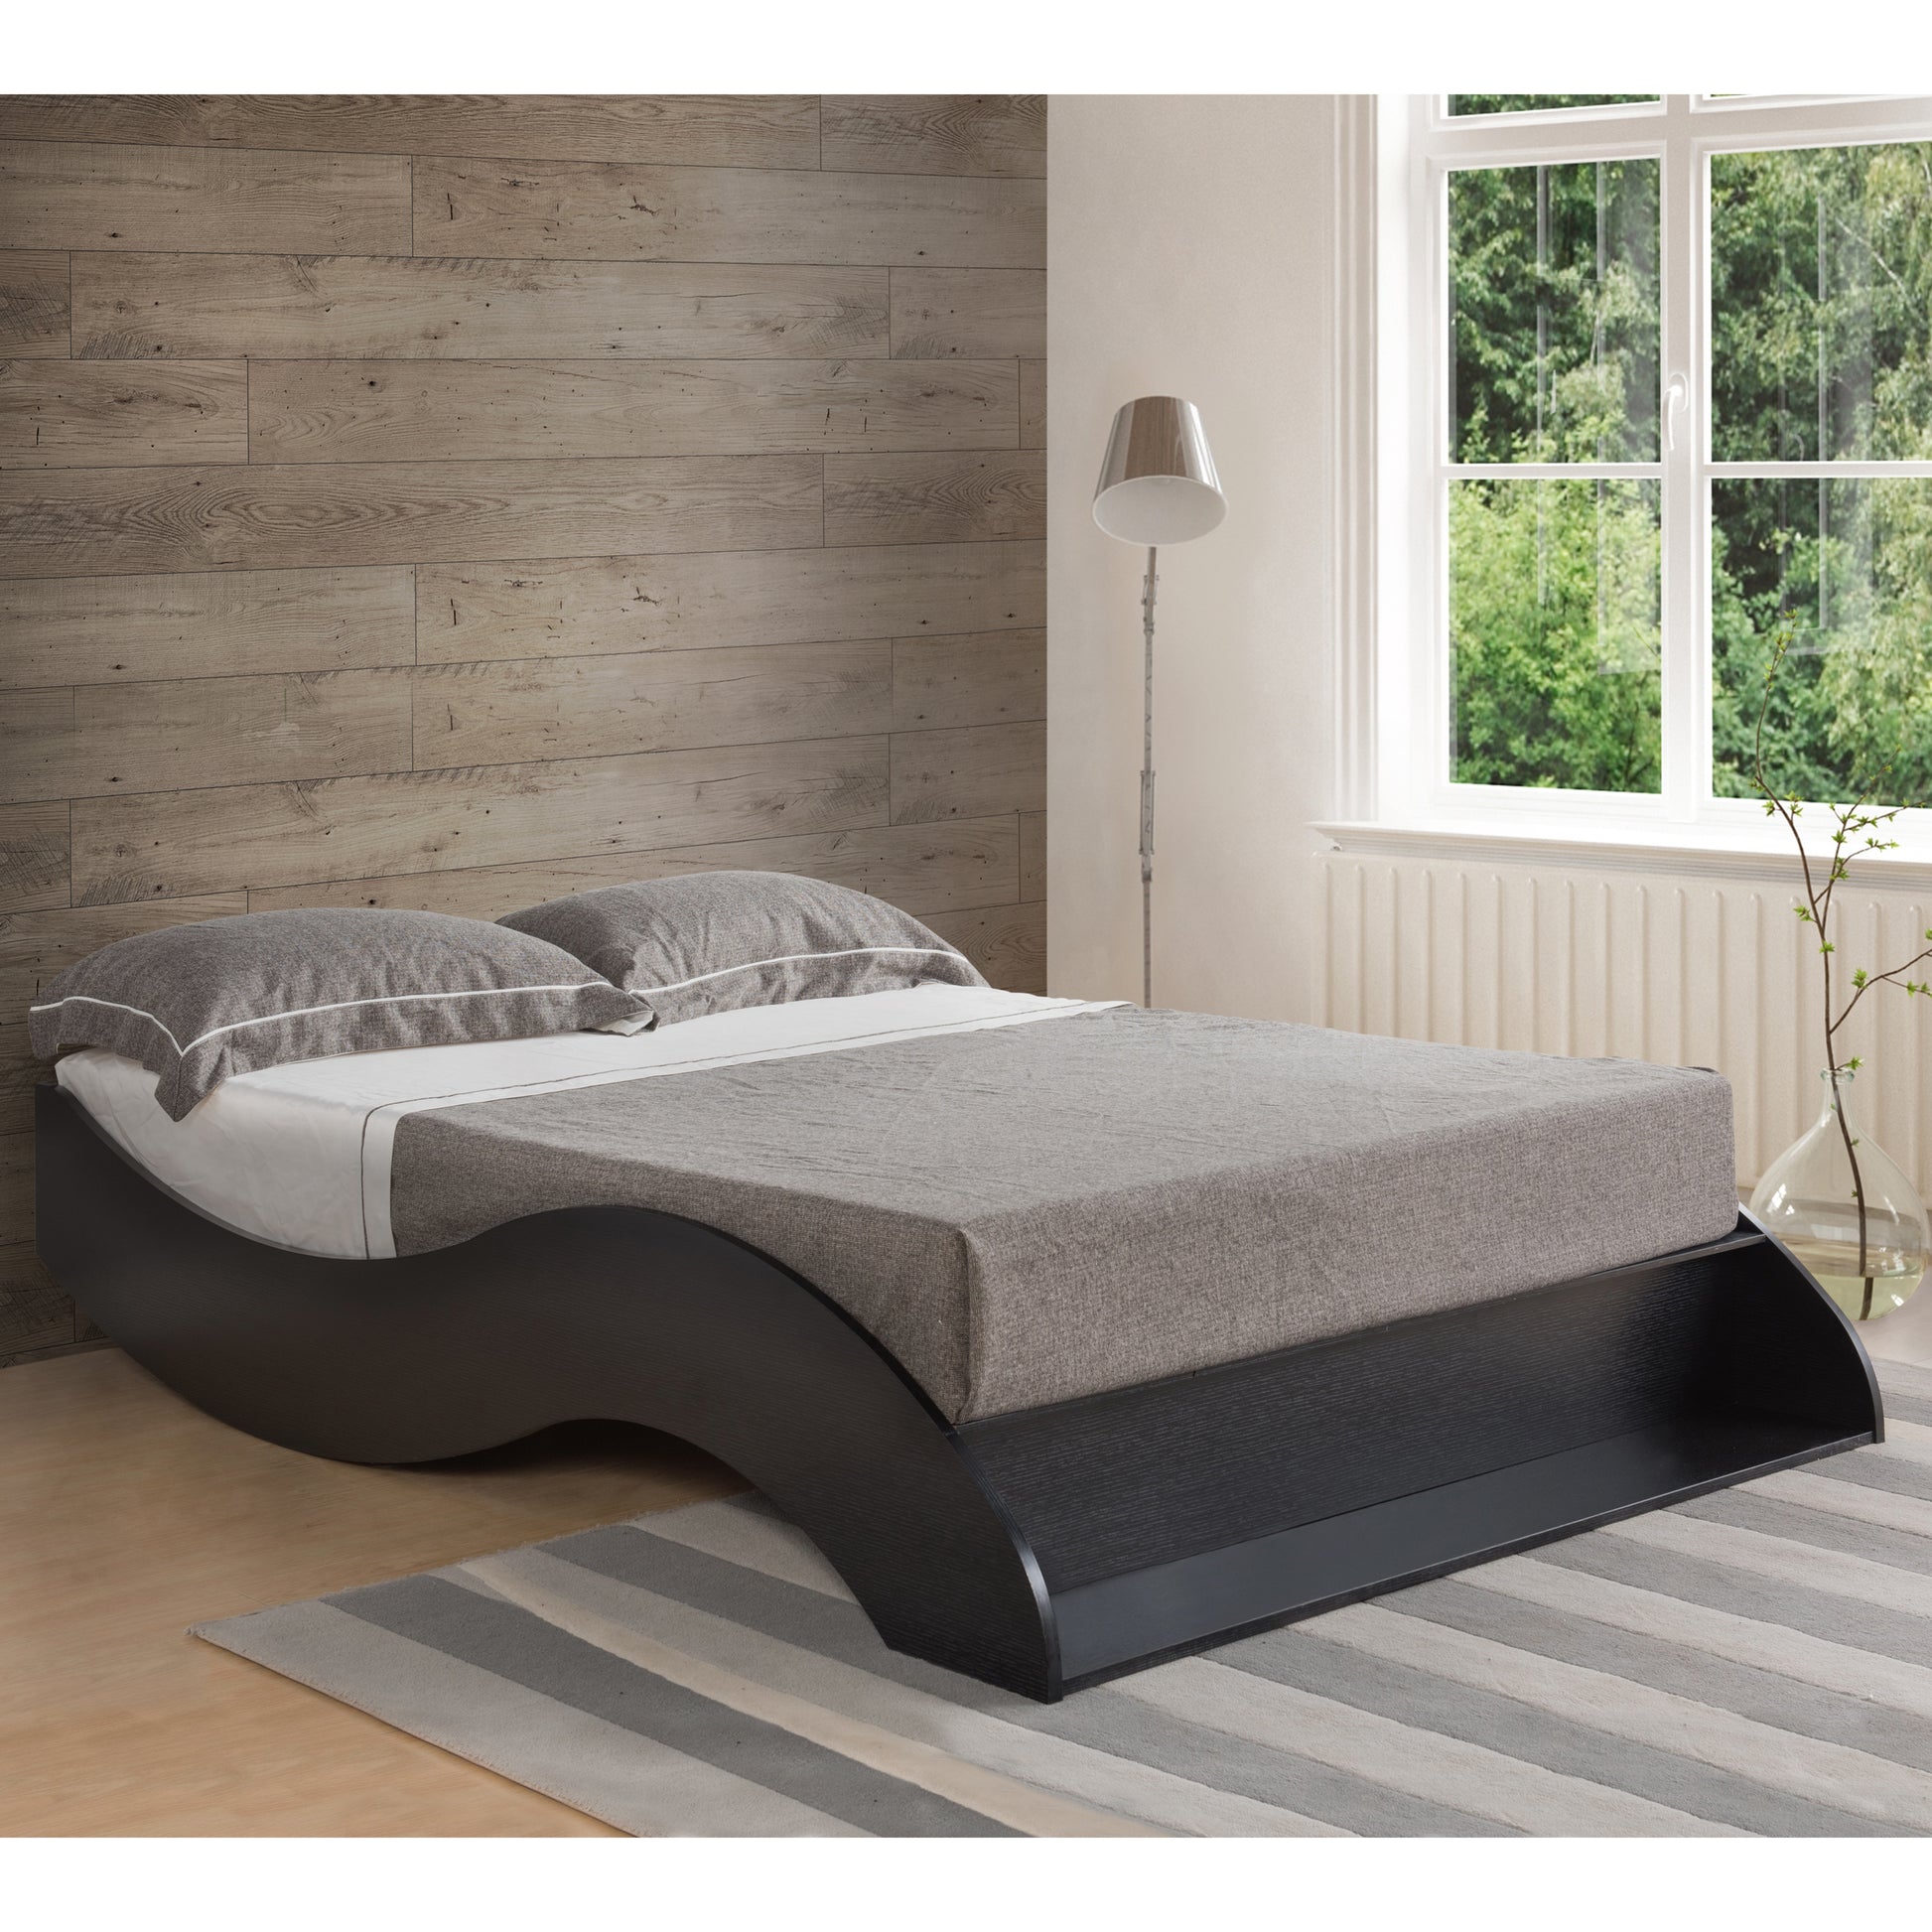 Right angled contemporary cappuccino curvy platform storage bed (with a bookcase headboard not shown) in a bedroom with accessories